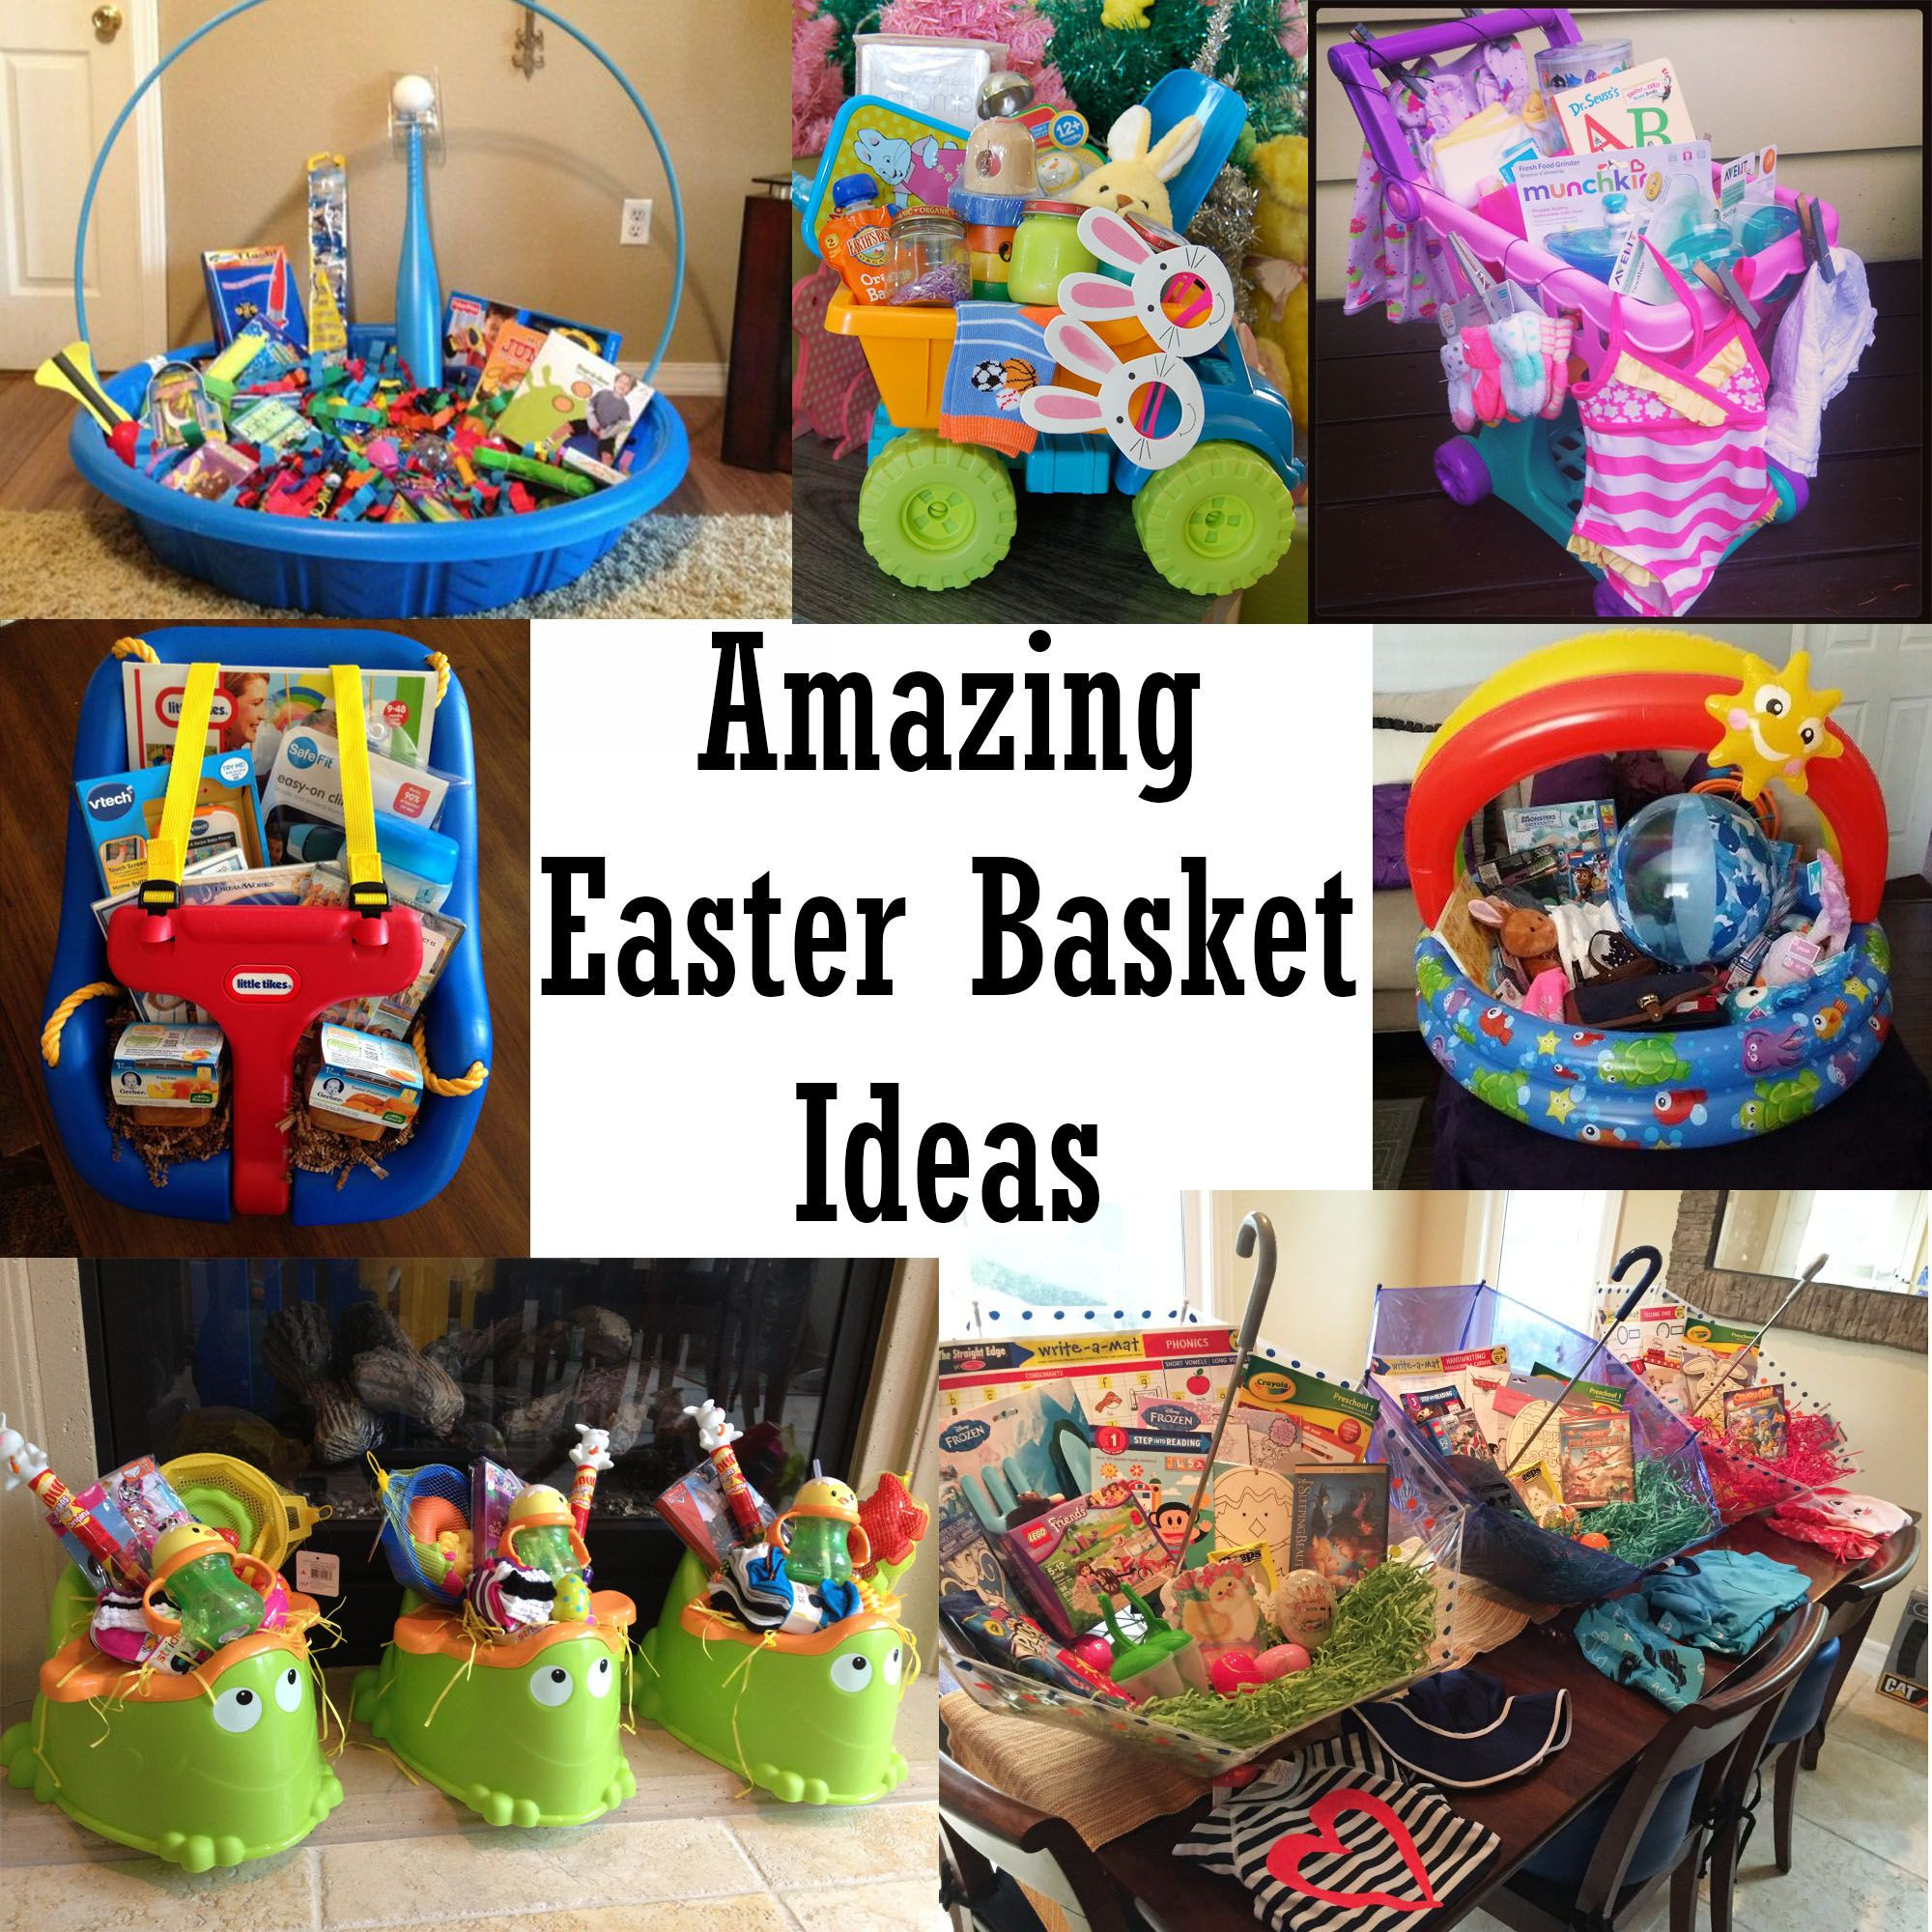 Ideas For Easter Baskets For Toddlers
 Amazing Easter Basket Ideas